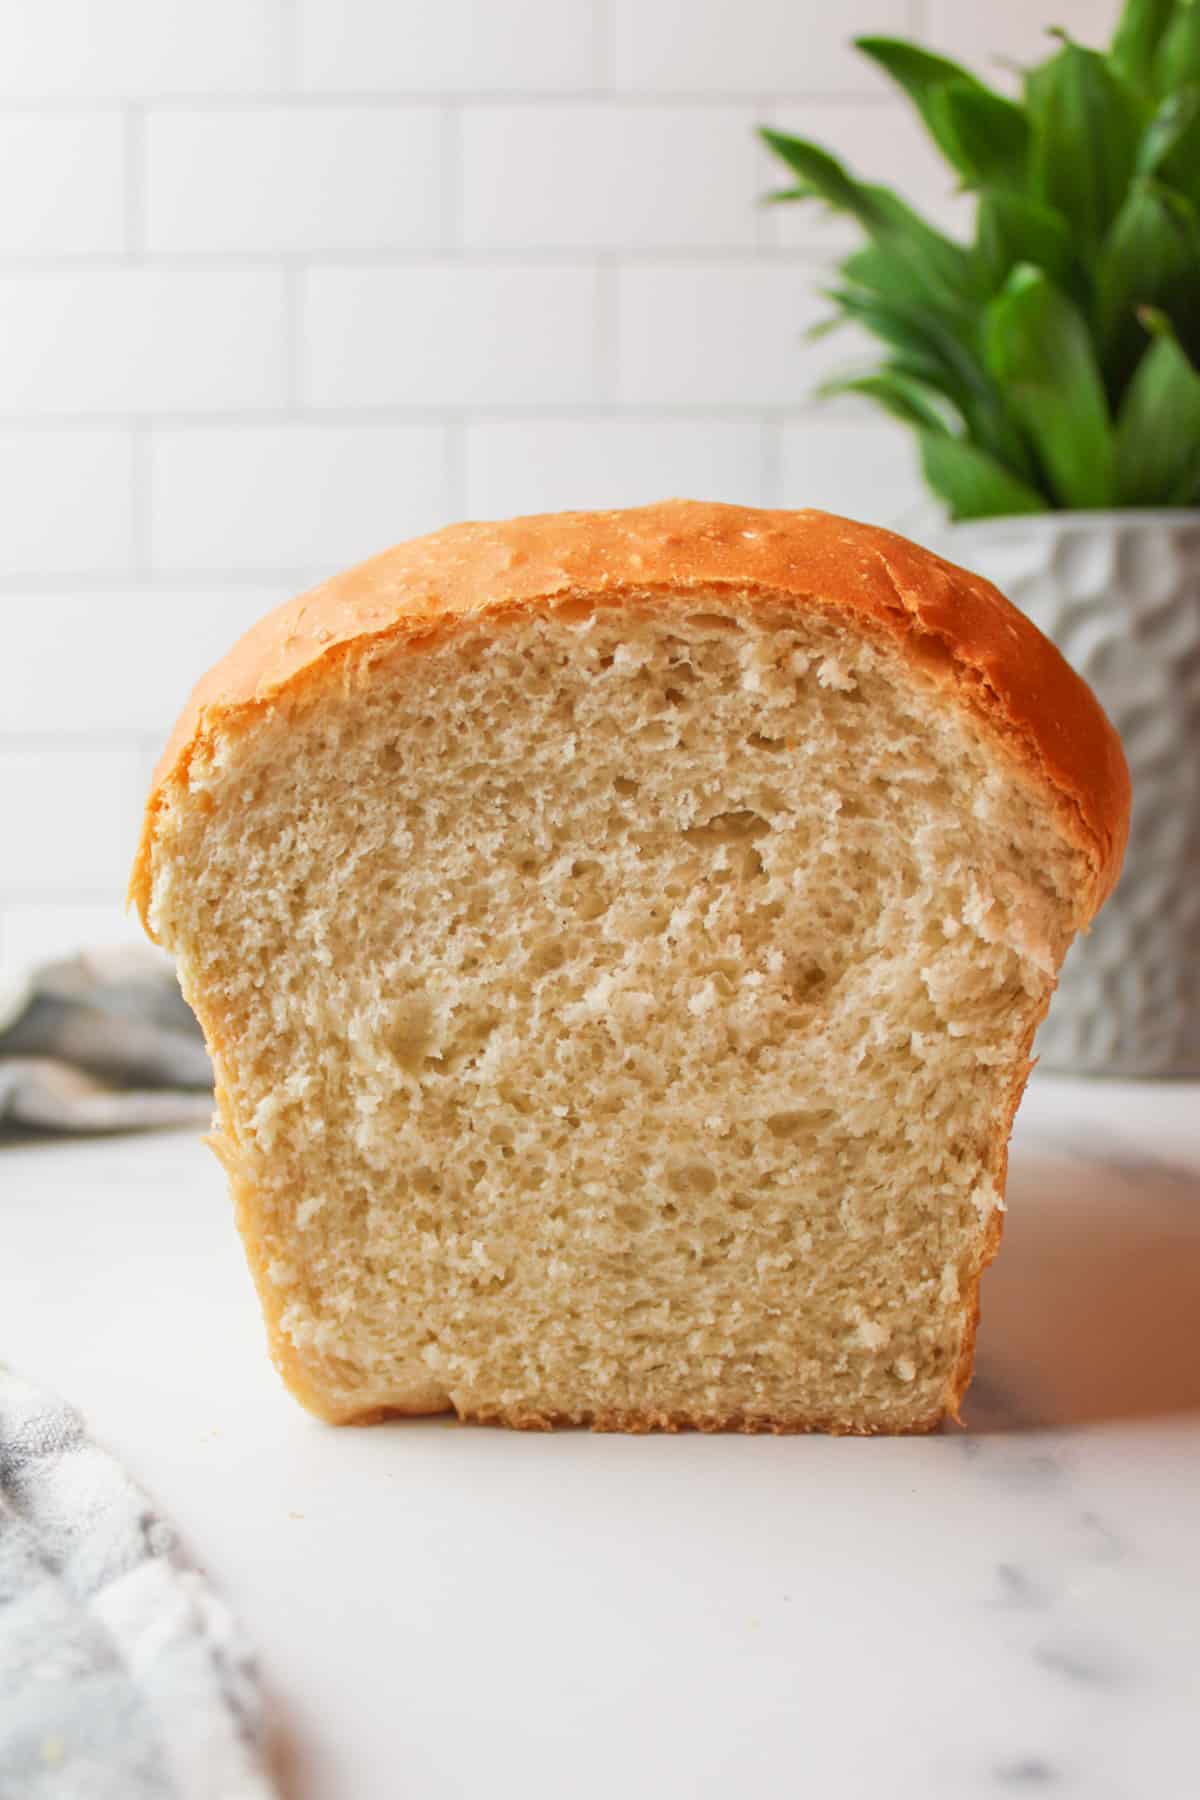 a loaf of white bread that has been sliced open to reveal the soft crumb inside